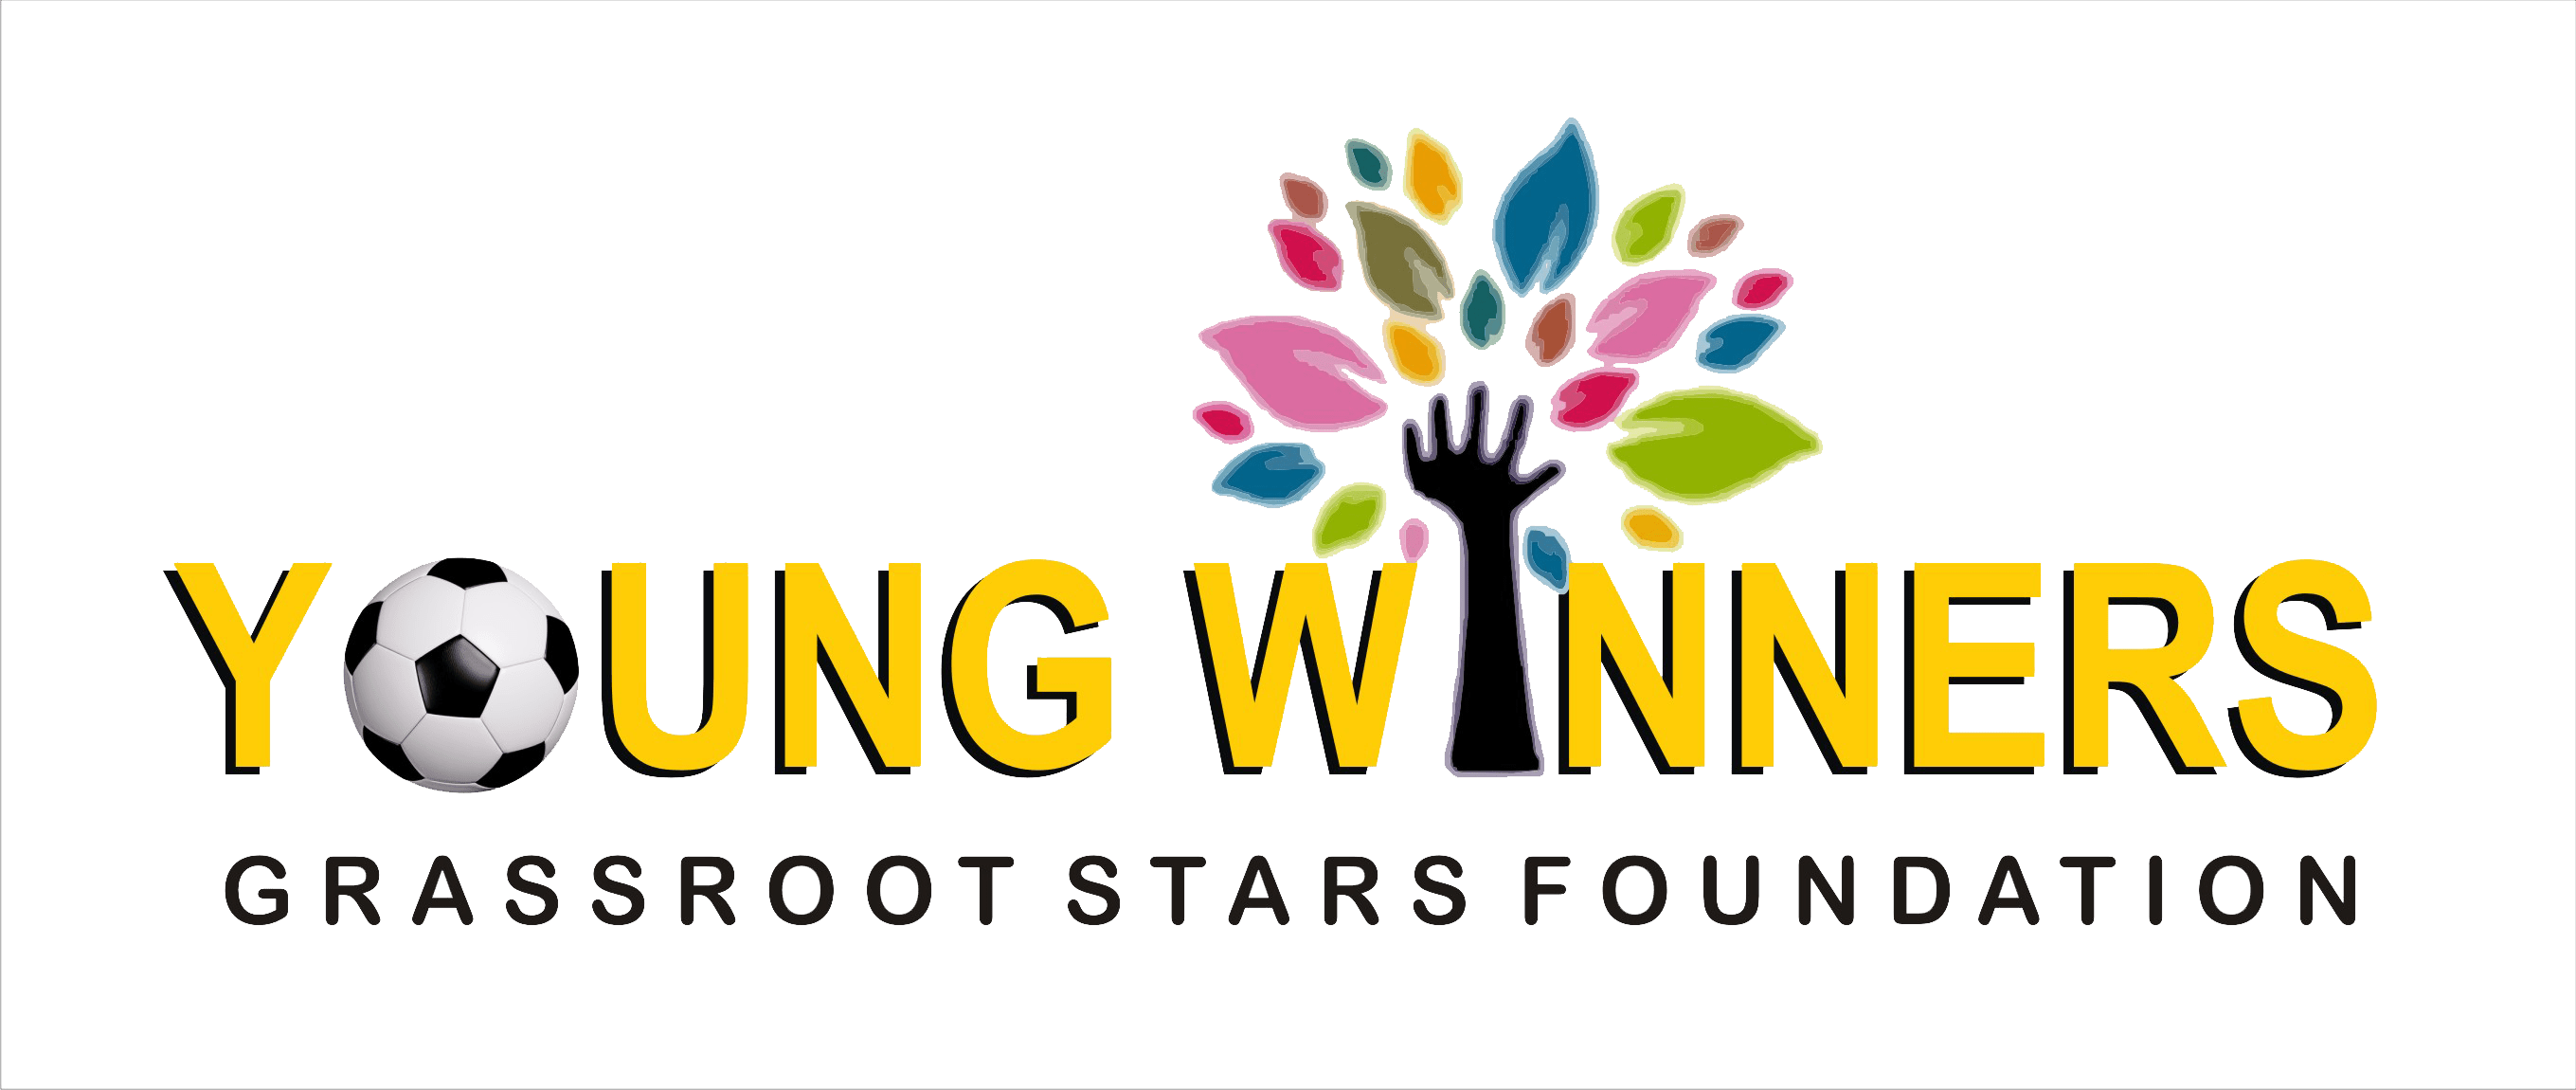 Young Winners Grassroot Stars Foundation